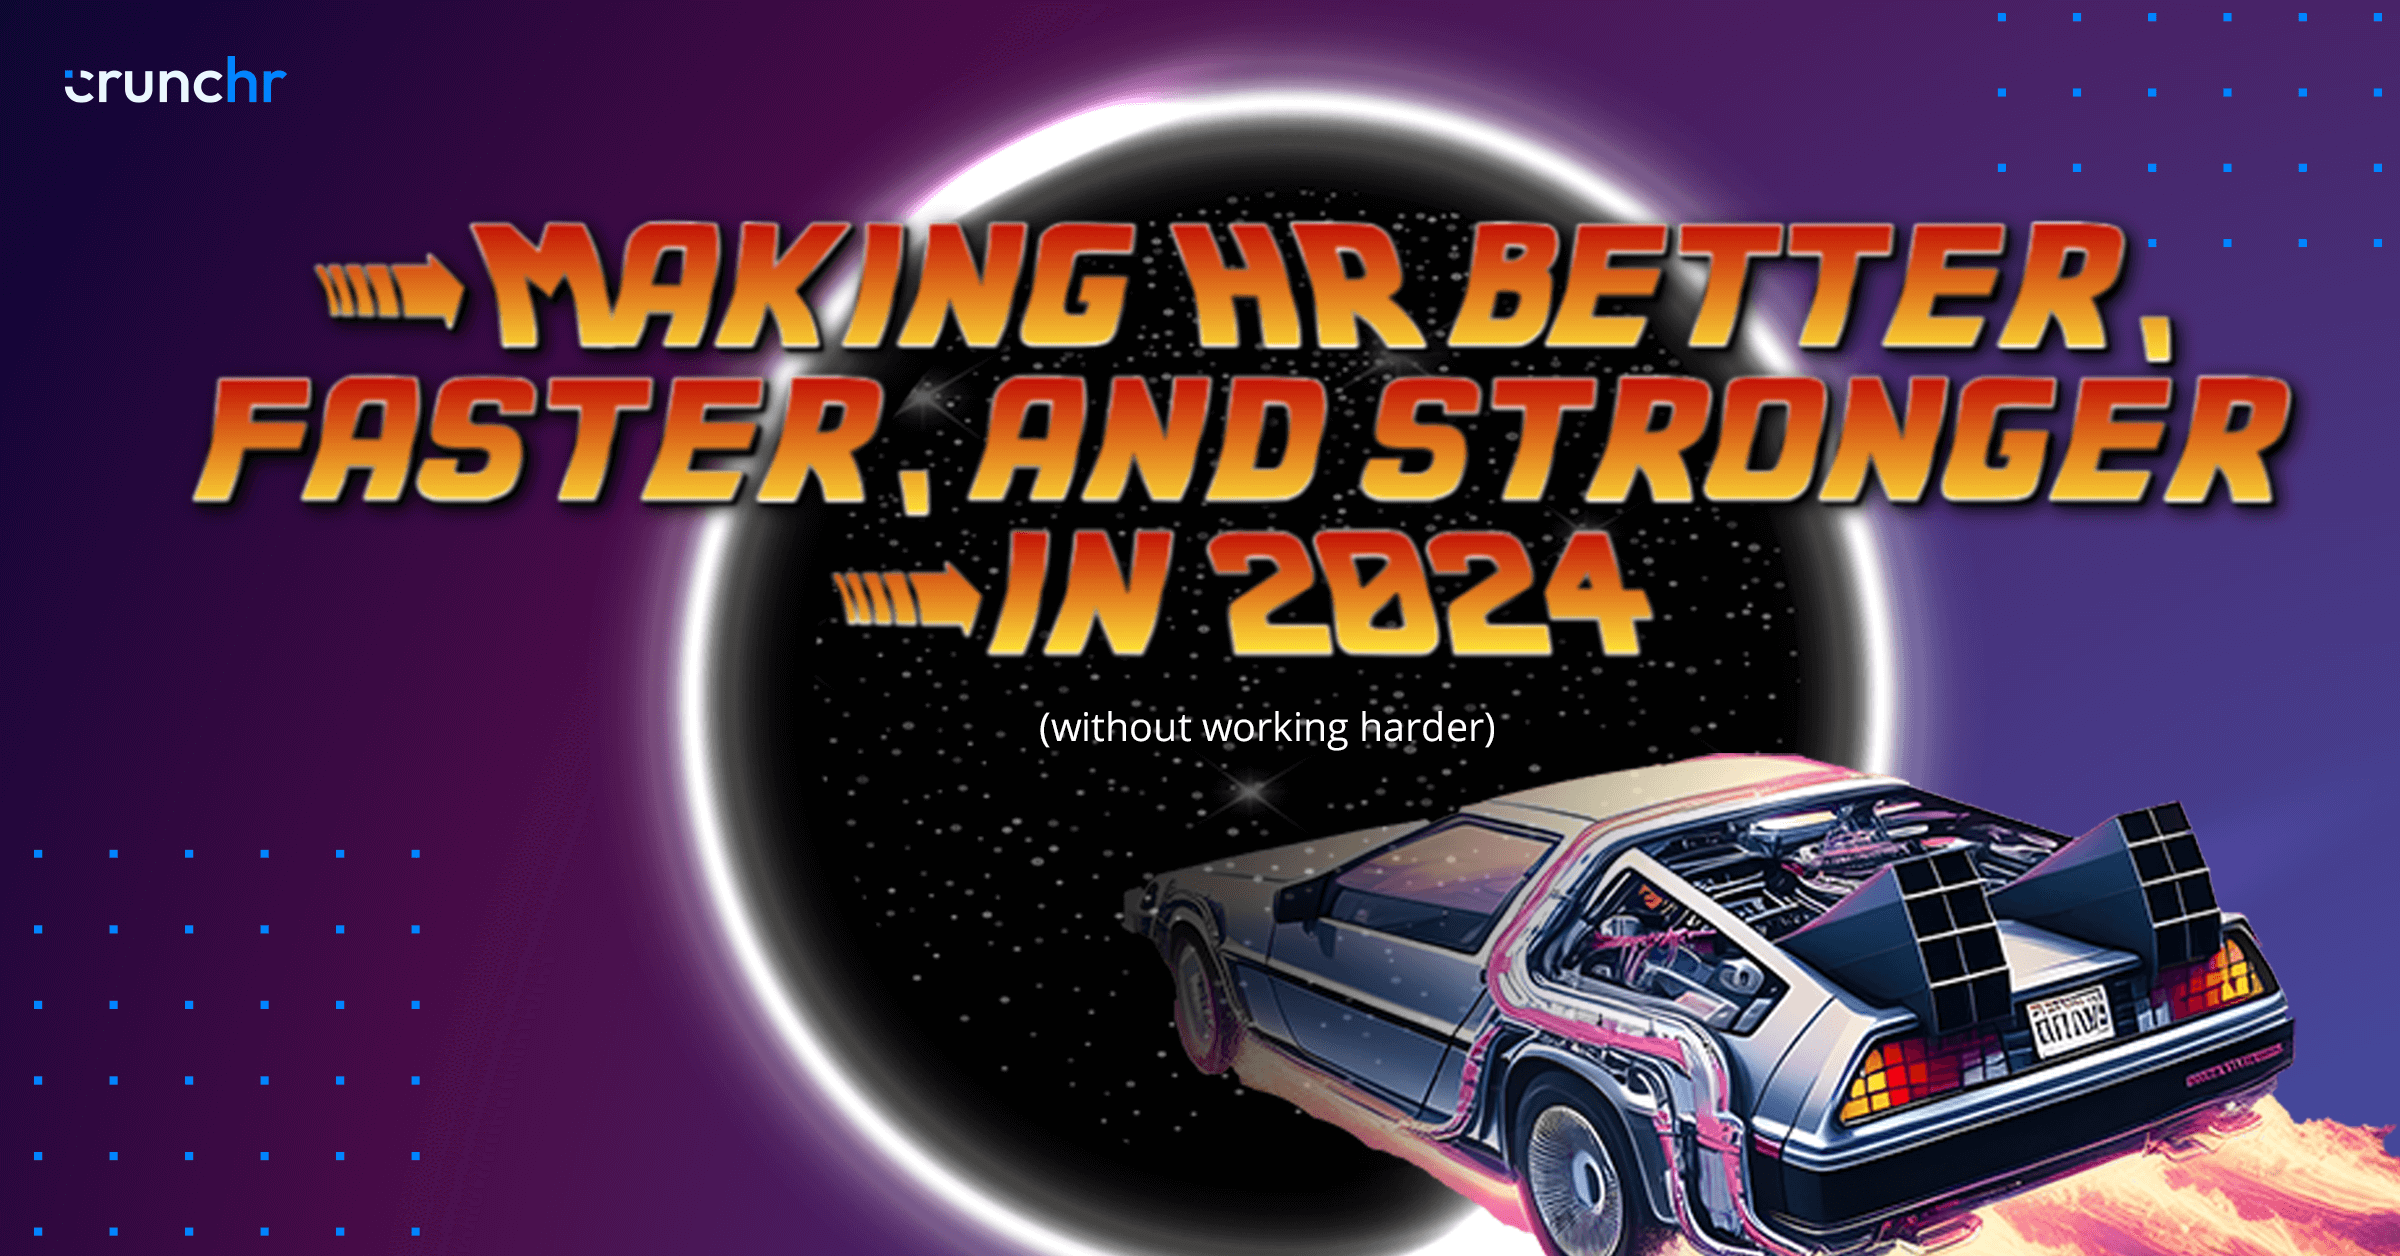 Crafting Future-Ready HR Strategies in 2024: AlignHR's Actionable